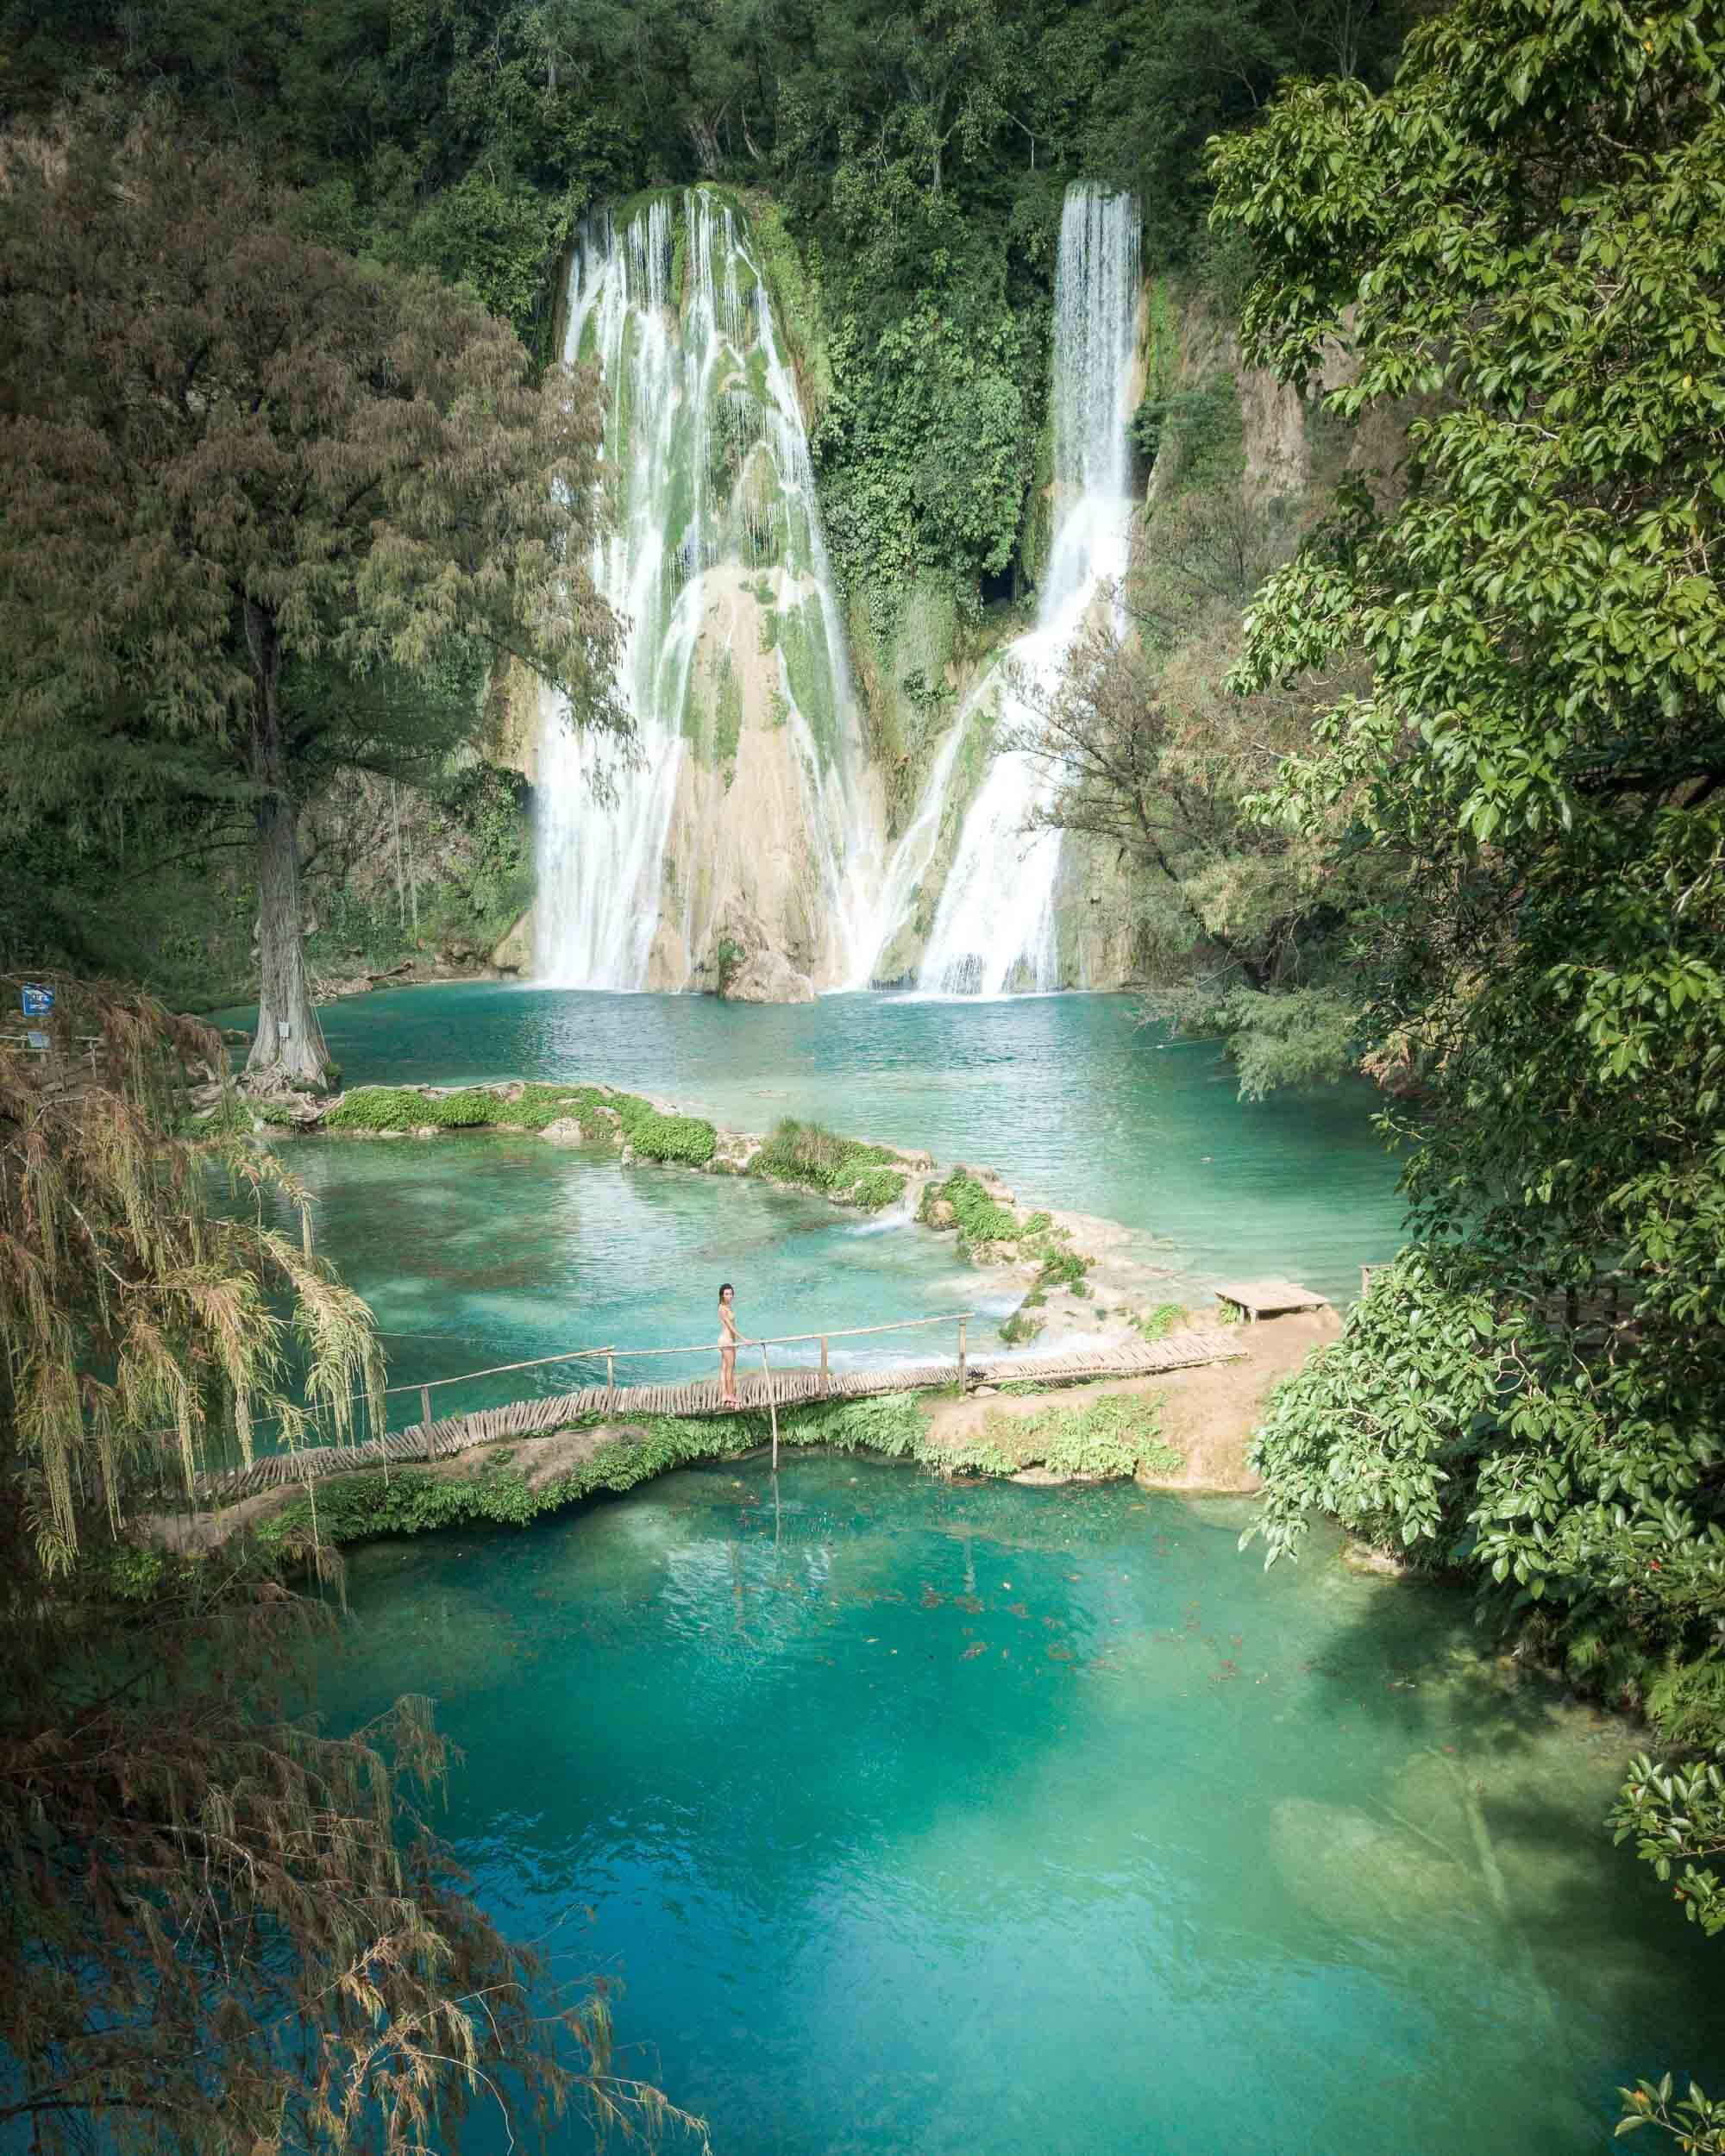 Minas Viejas is a beautiful waterfall in Mexico.